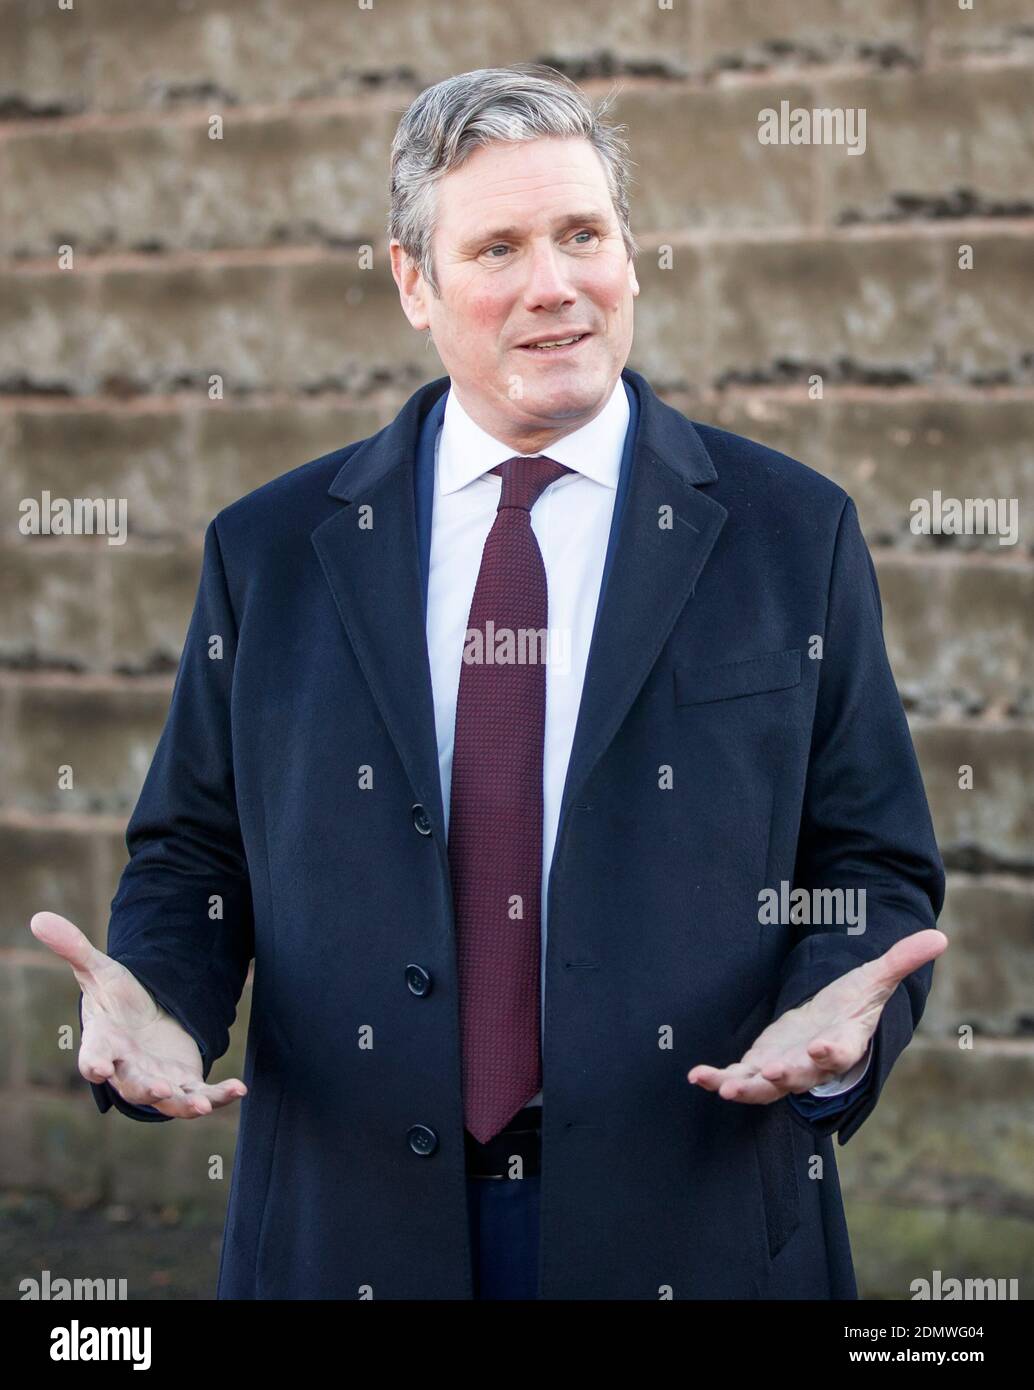 Labour leader Sir Keir Starmer during a visit to Bentley, South Yorkshire, to meet residents and business owners affected by last year's floods and discuss flood preparedness for this winter in light of Covid-19. Stock Photo